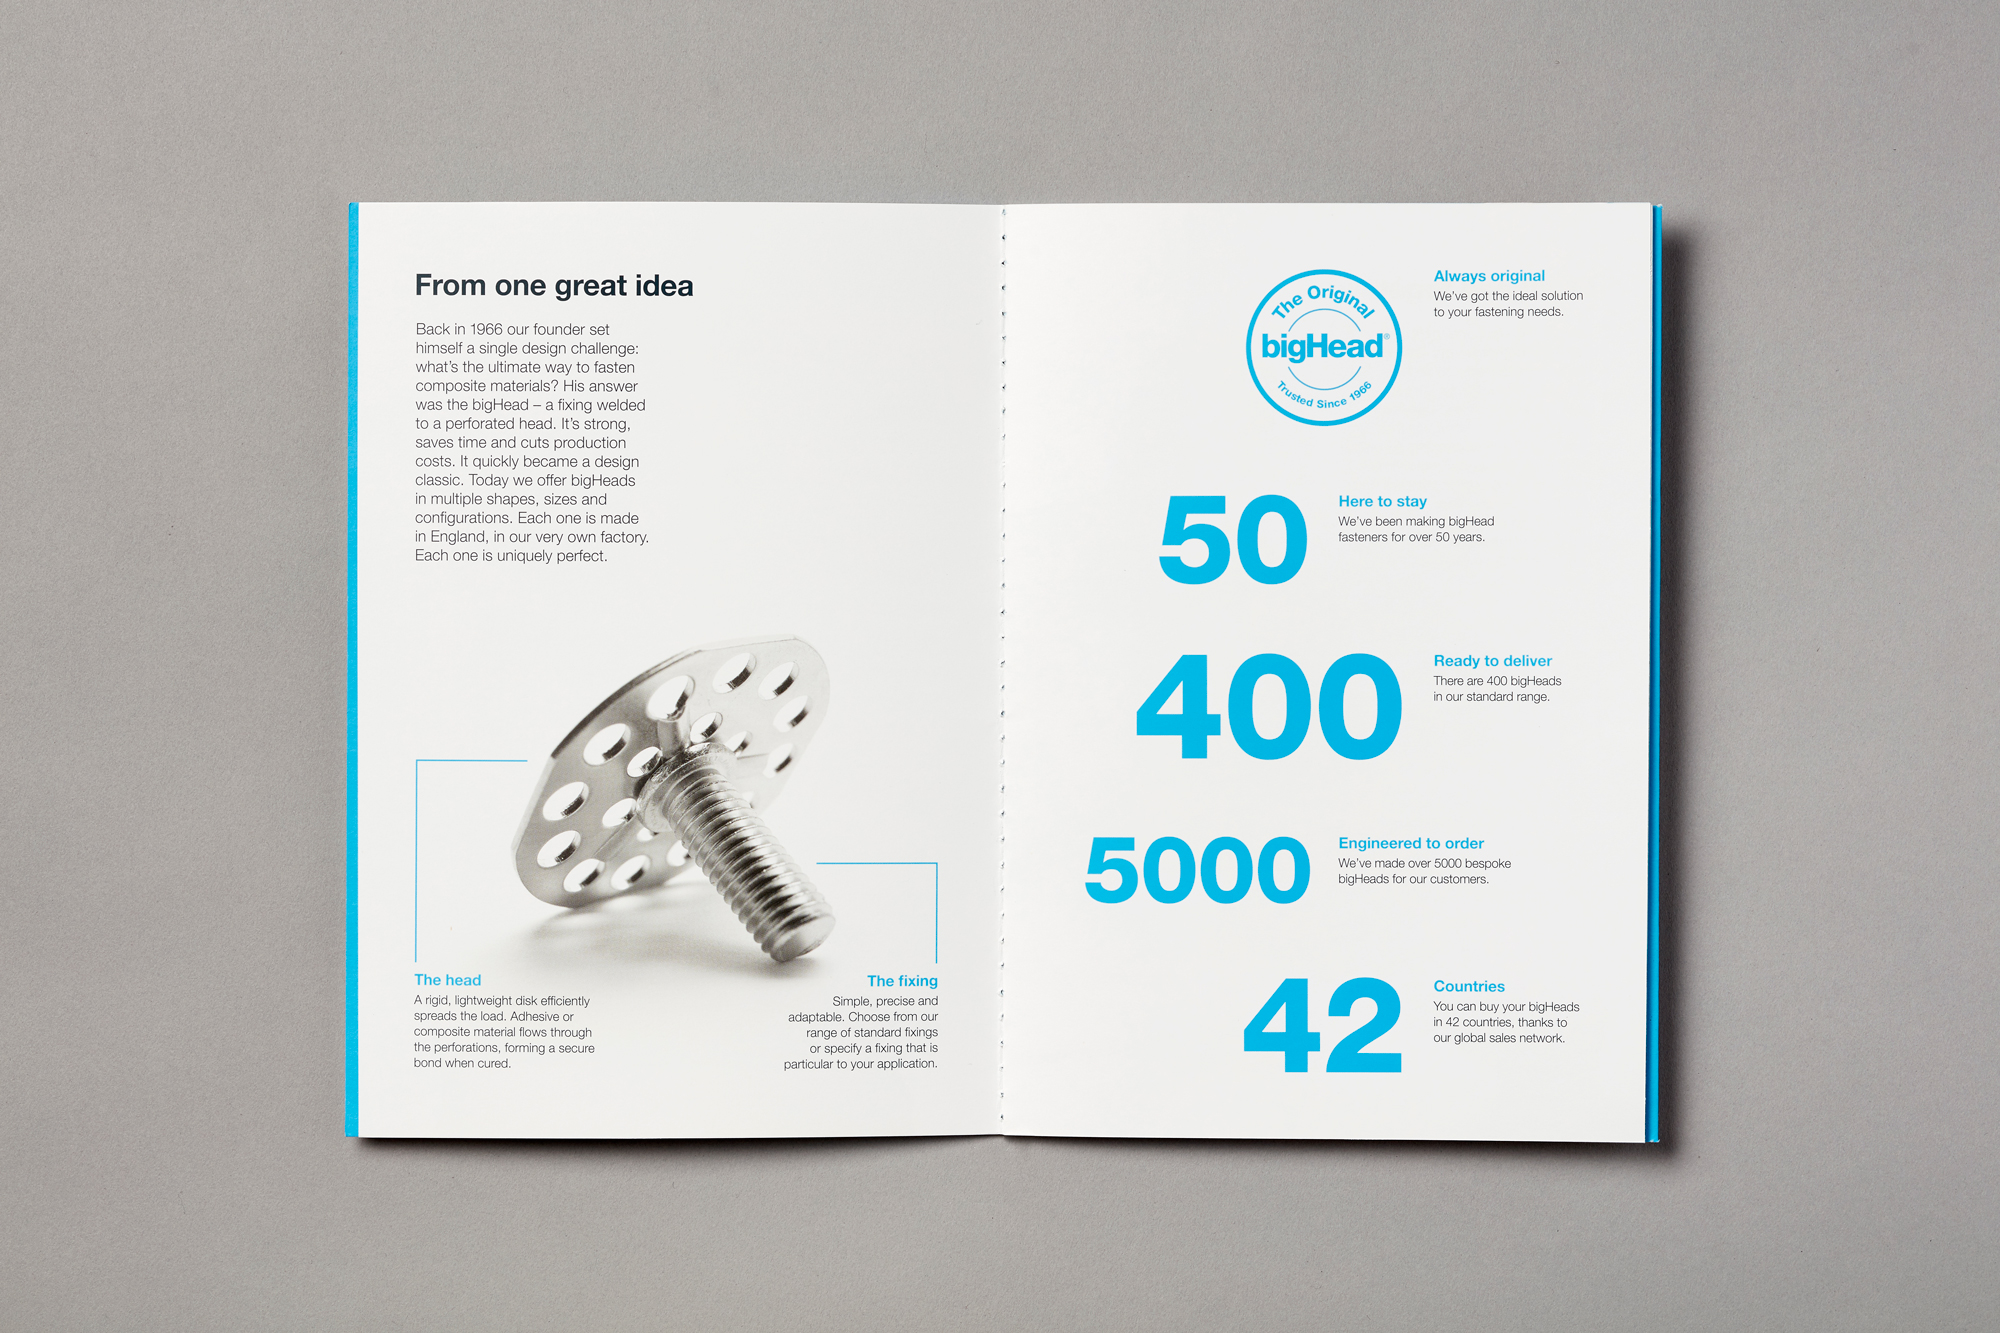 Marketing brochure spread showing overview of business achievements